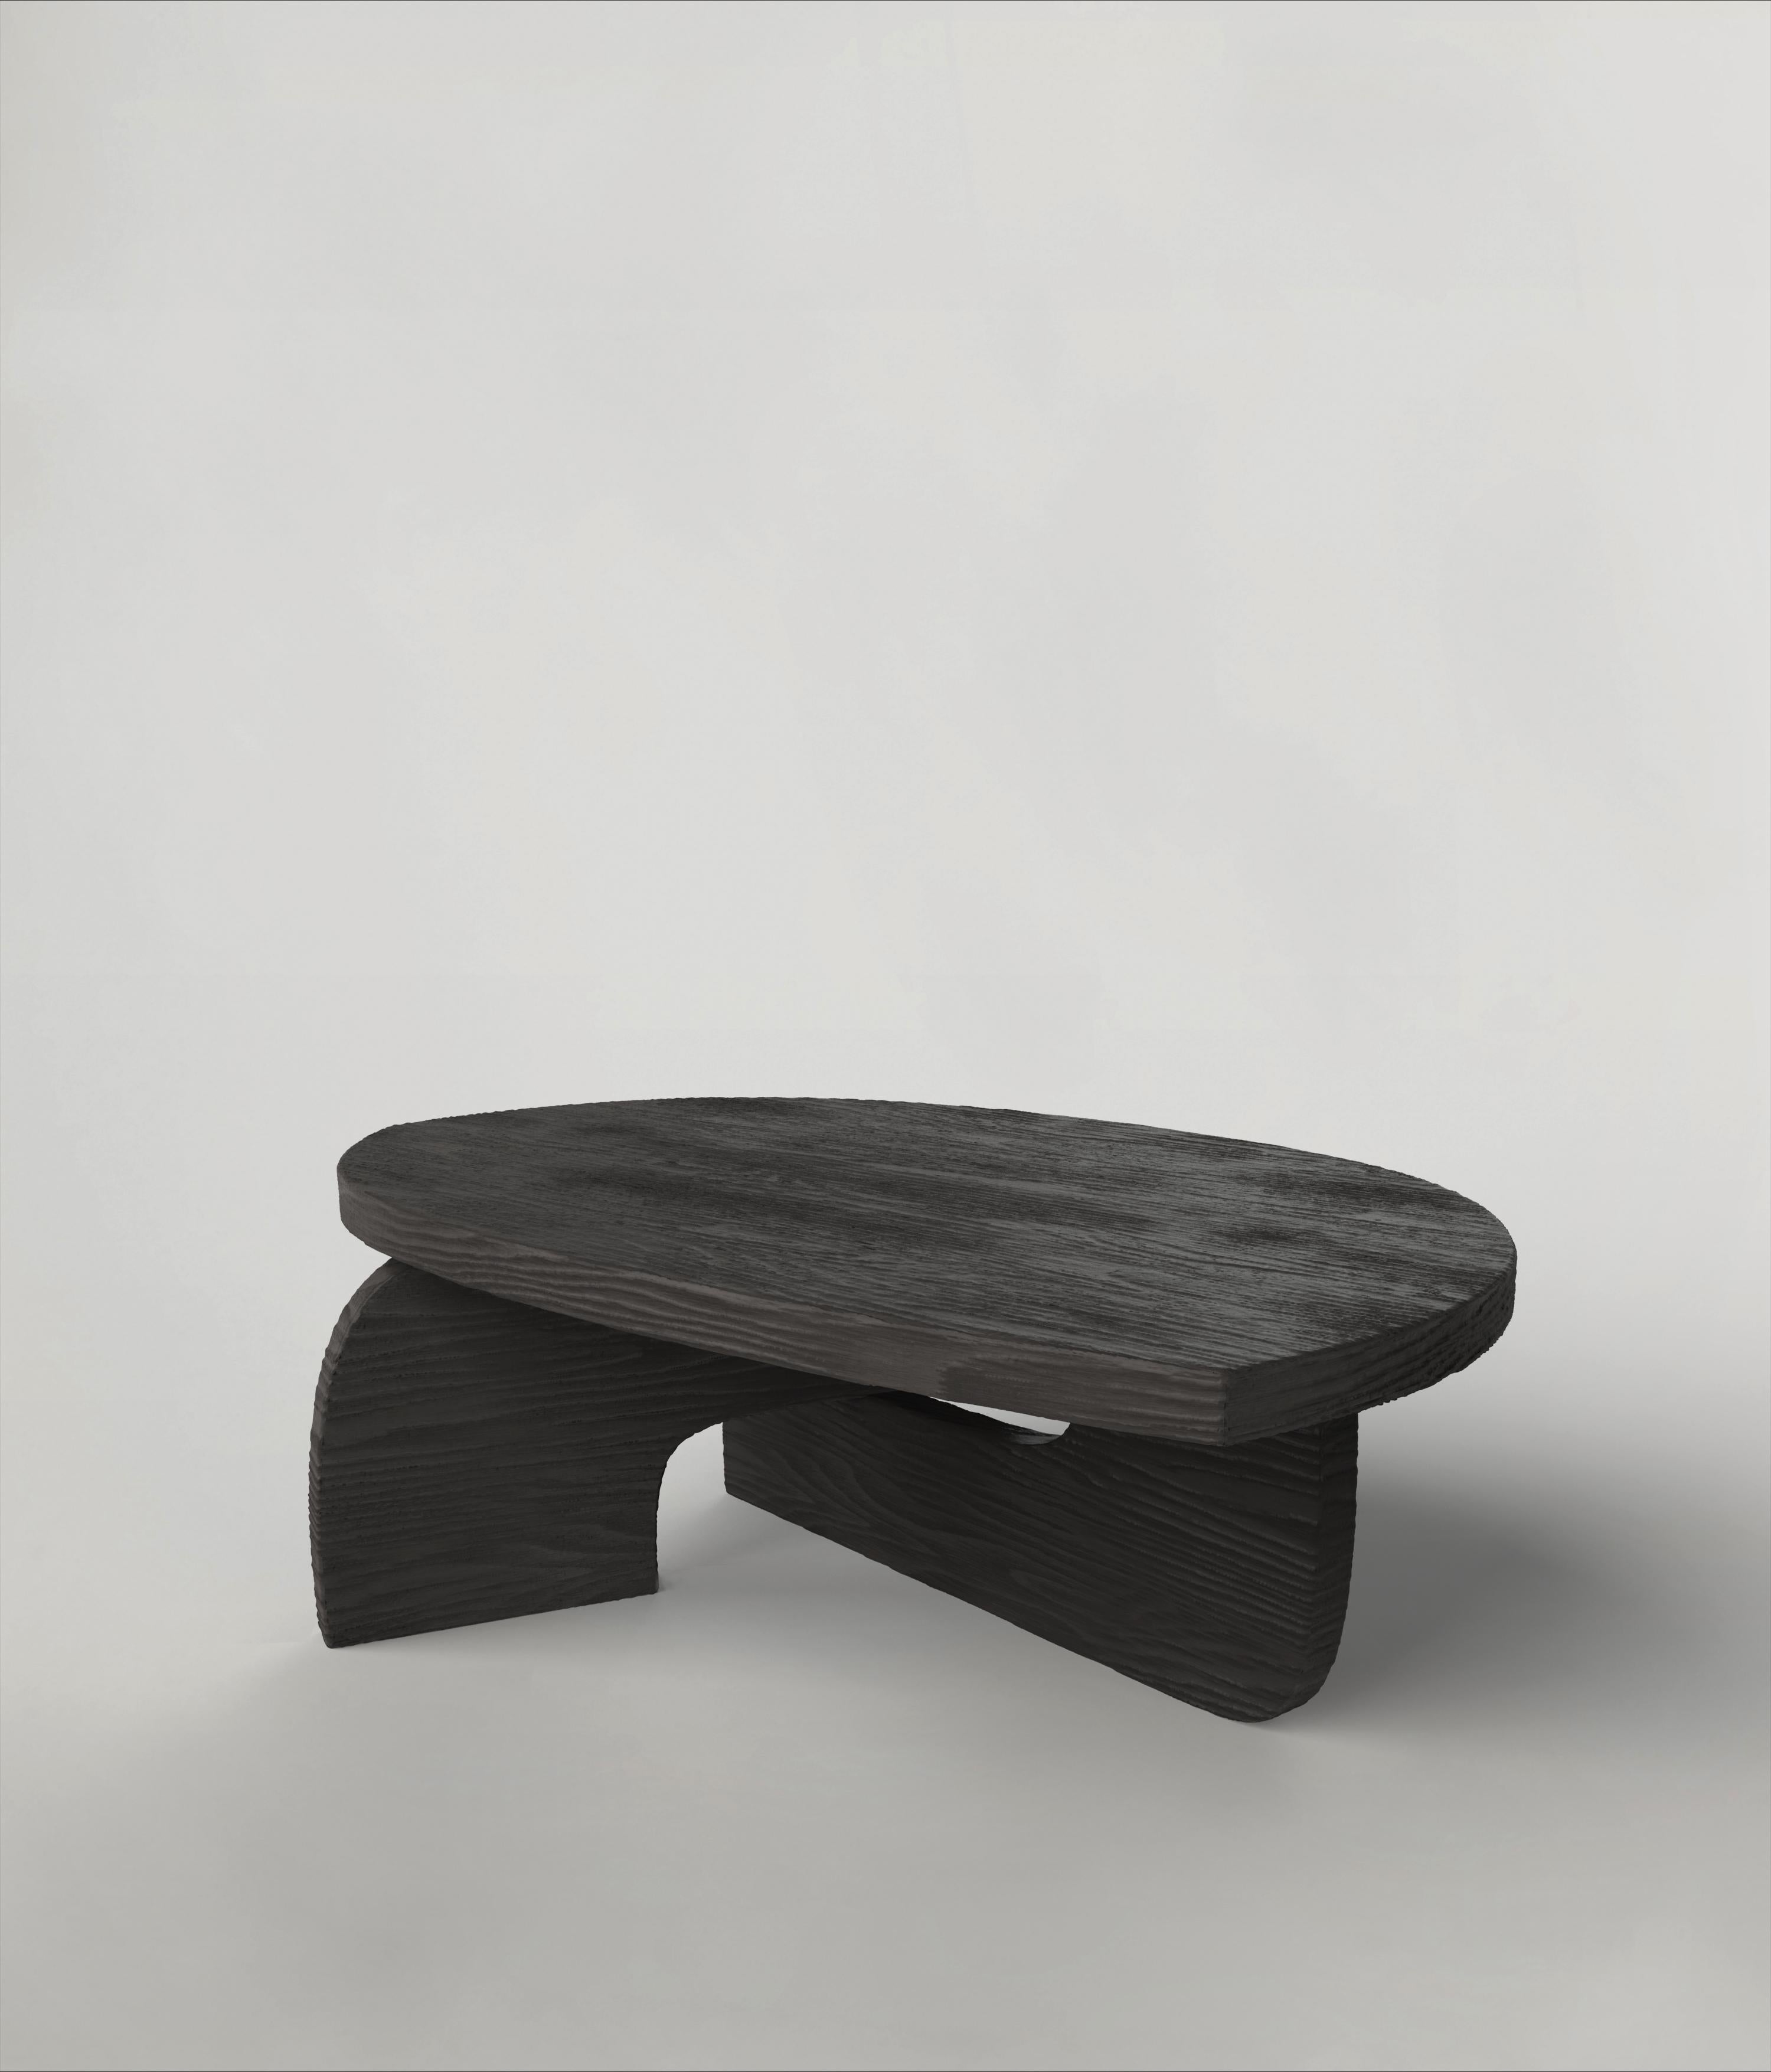 Wood Contemporary Limited Edition Charred Low Table, Reef V3 by Edizione Limitata For Sale